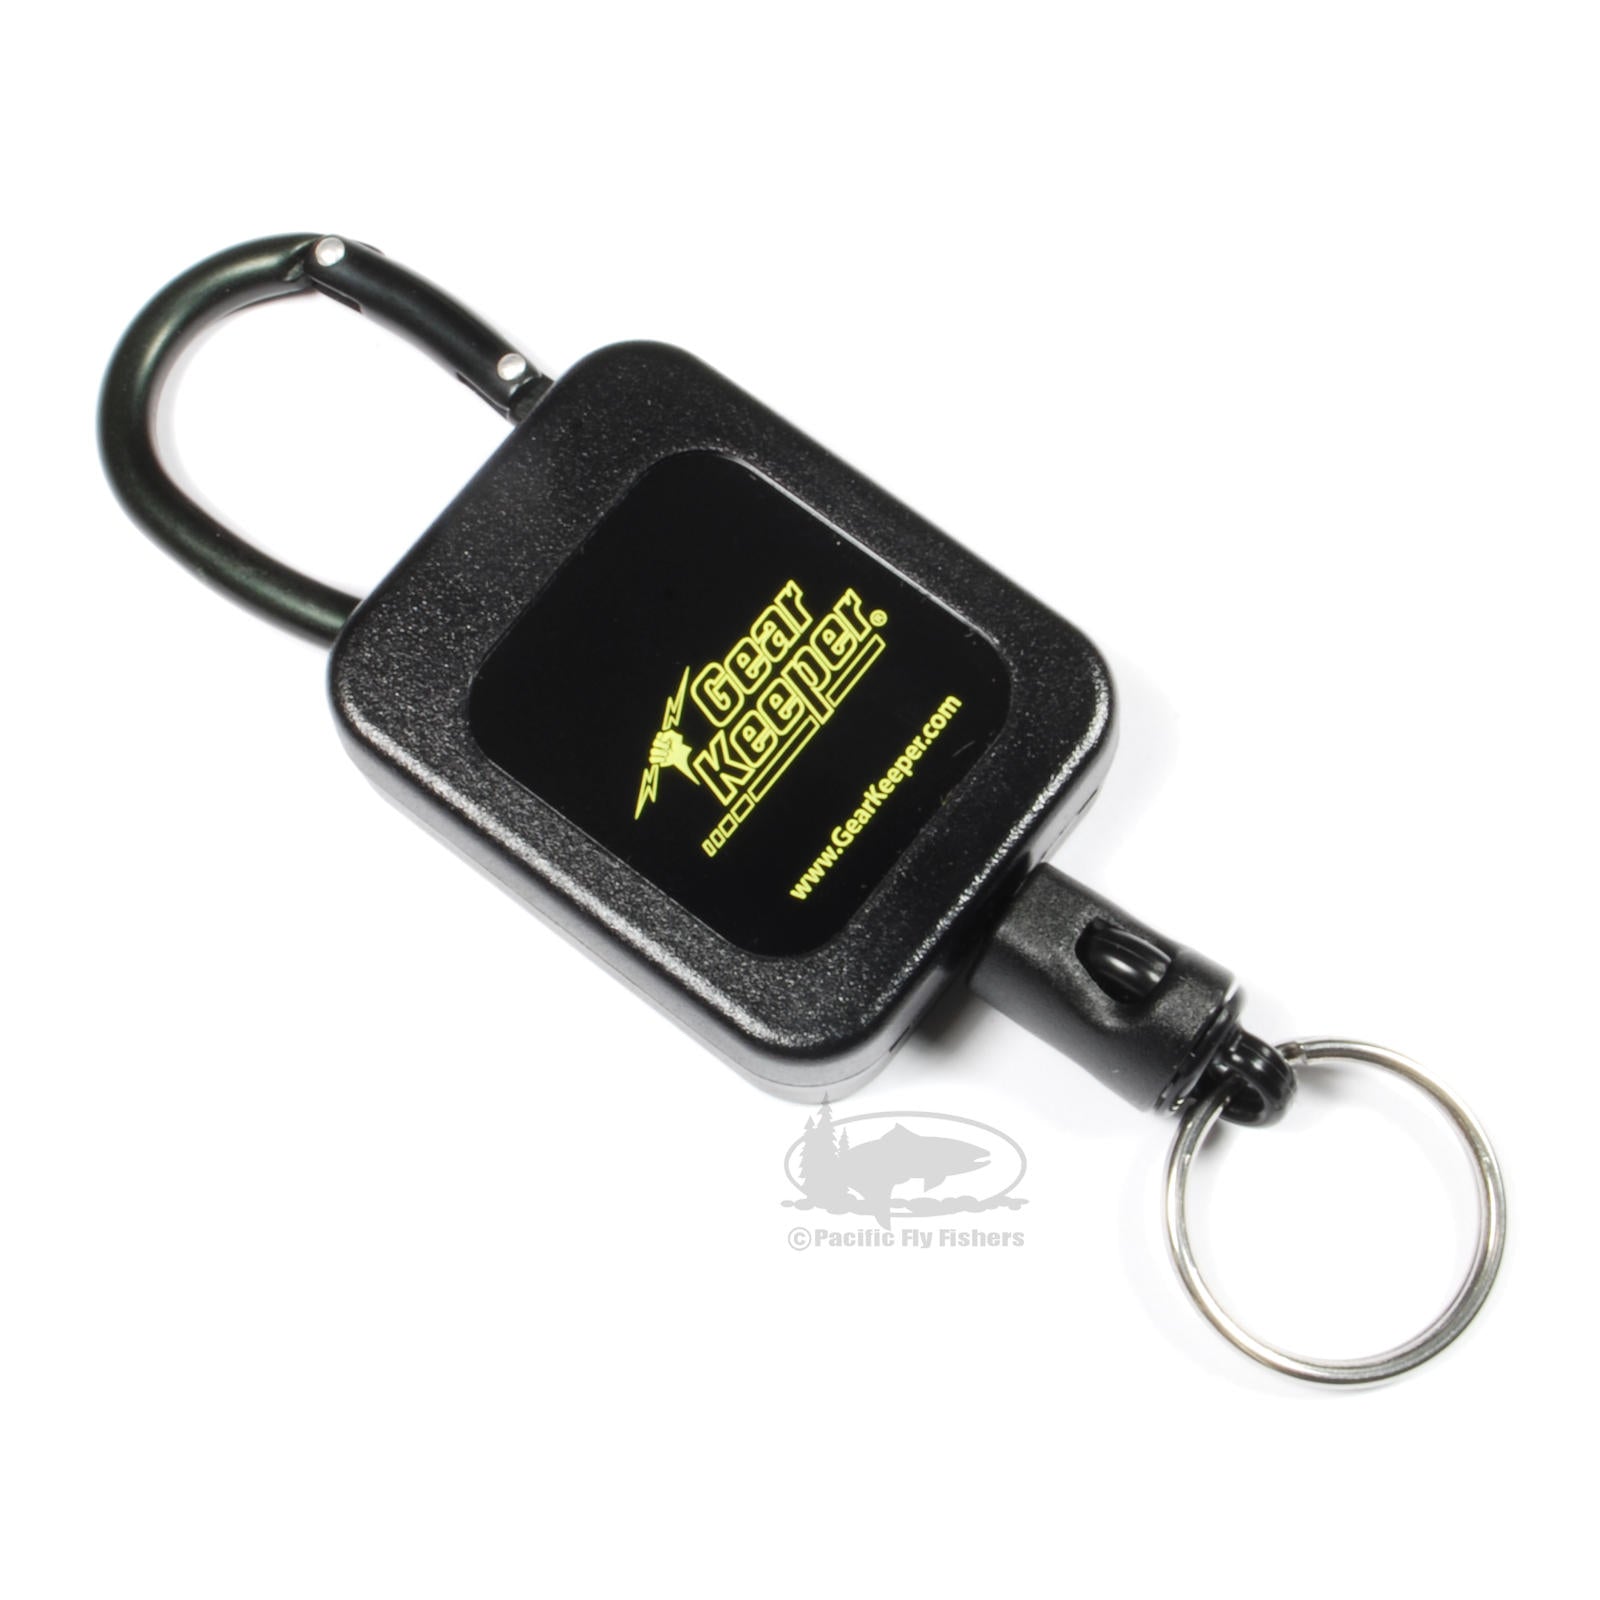 Gear Keeper Net Retractor - Fly Fishing and Kayak